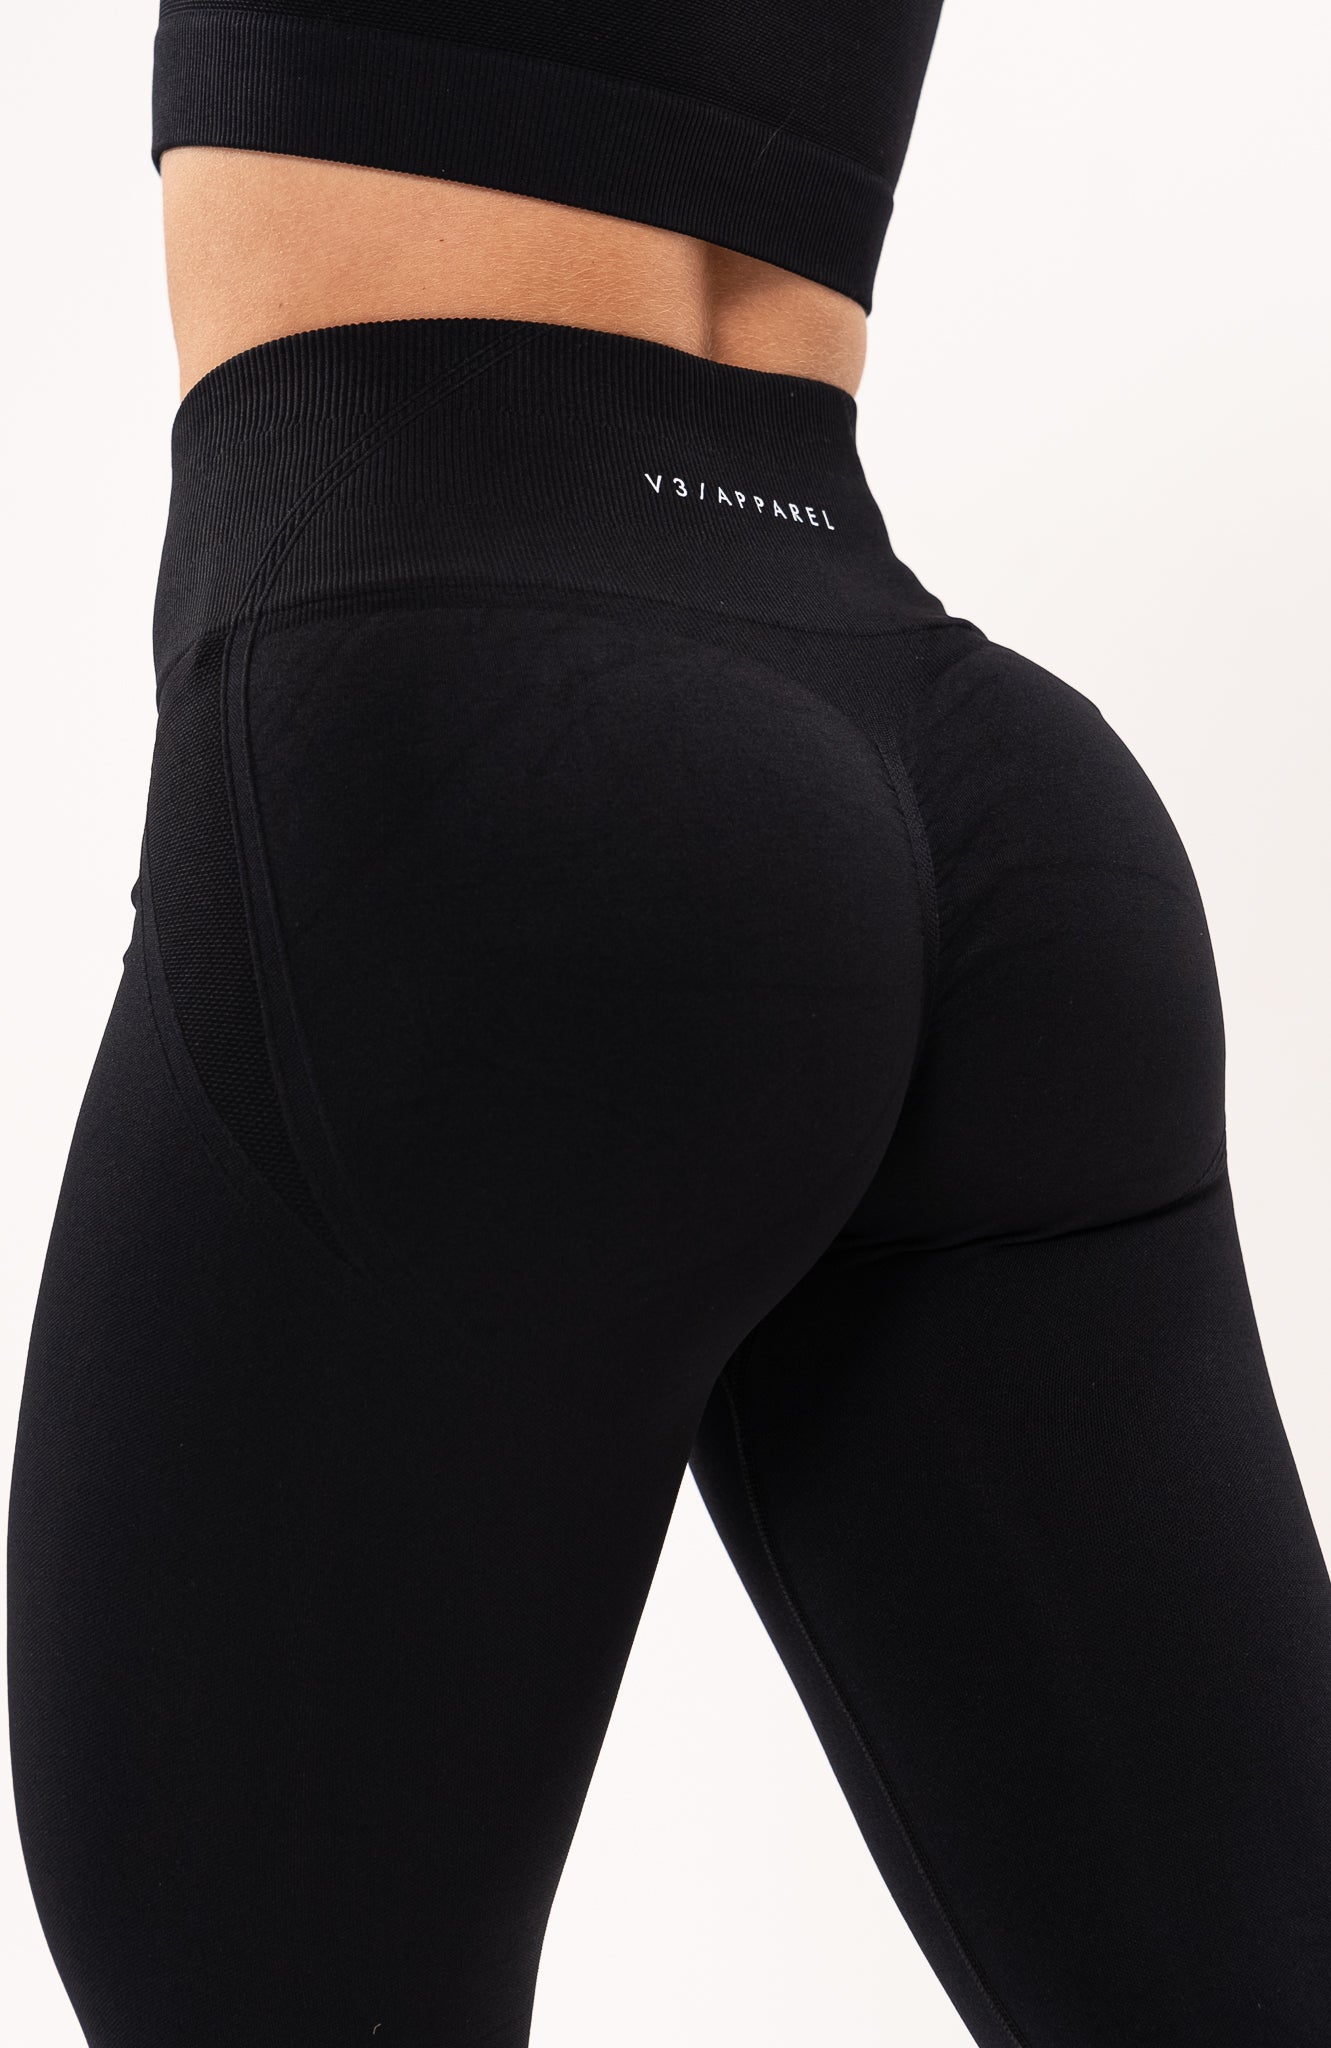 V3 Apparel Women's Tempo seamless scrunch bum shaping high waisted leggings and training sports bra in black – Squat proof sports tights and training bra for Gym workouts training, Running, yoga, bodybuilding and bikini fitness.